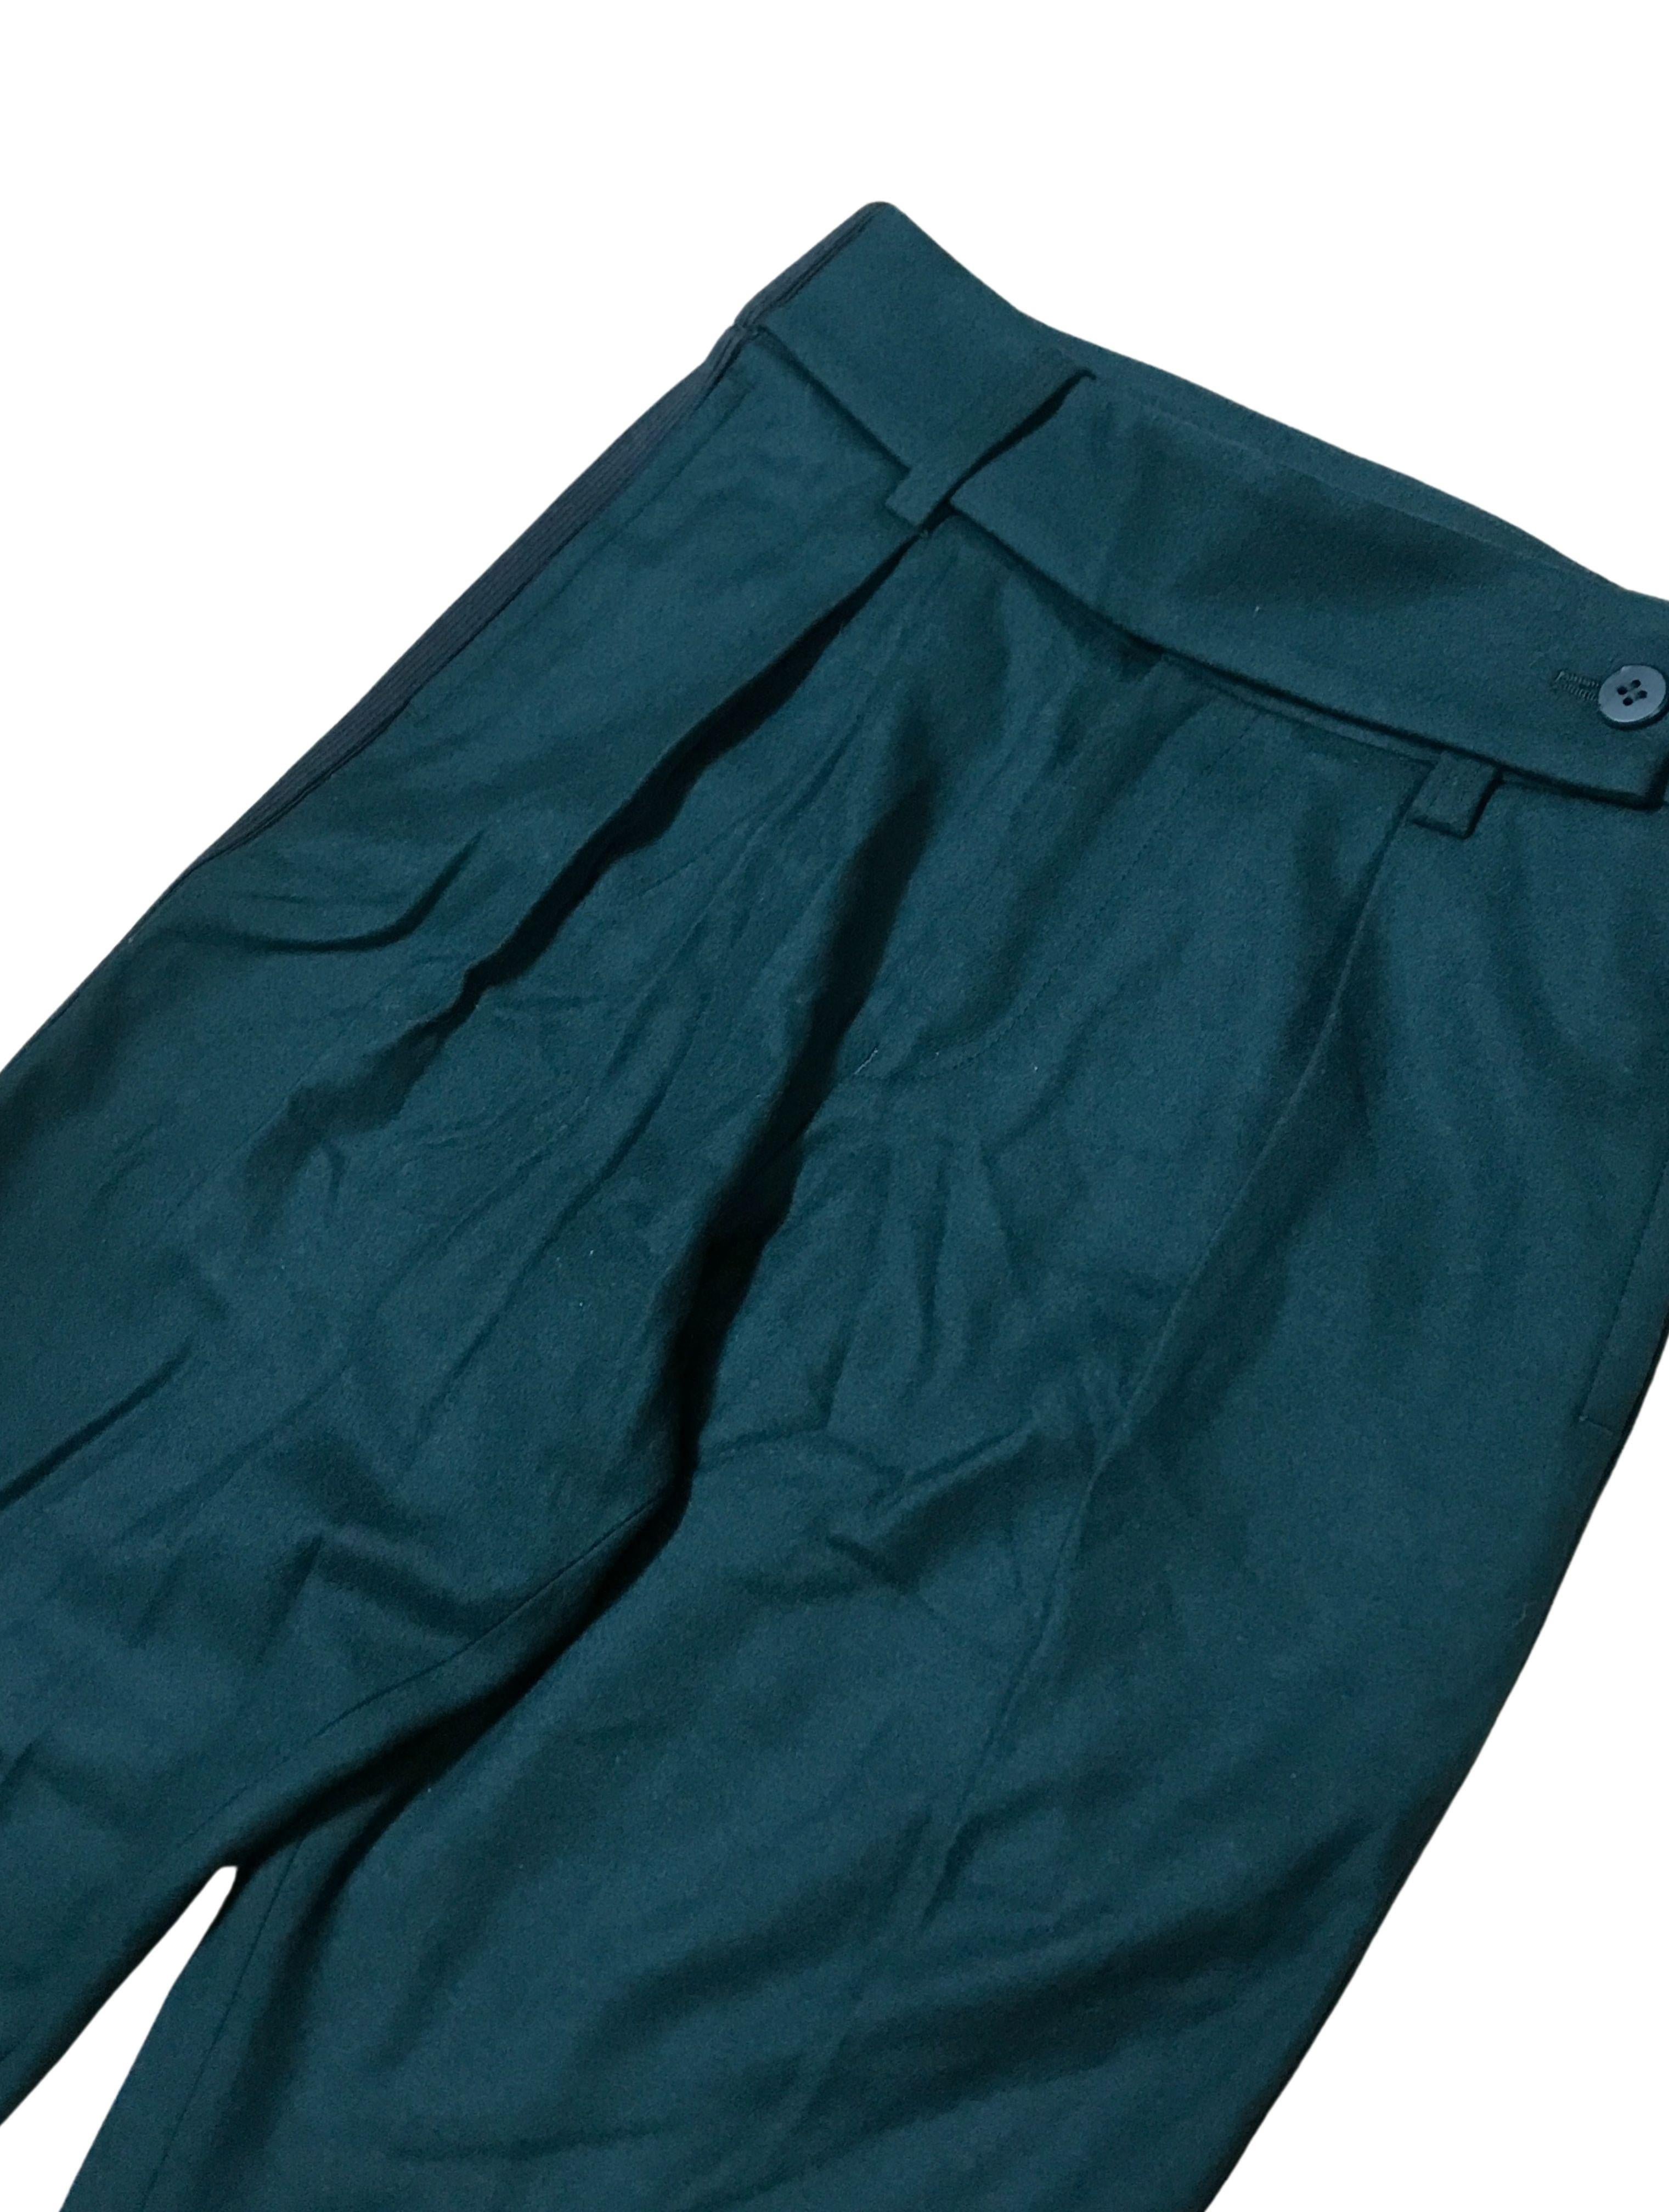 Issey Miyake Wool-Blended Straight Fit Pants In Excellent Condition For Sale In Seattle, WA